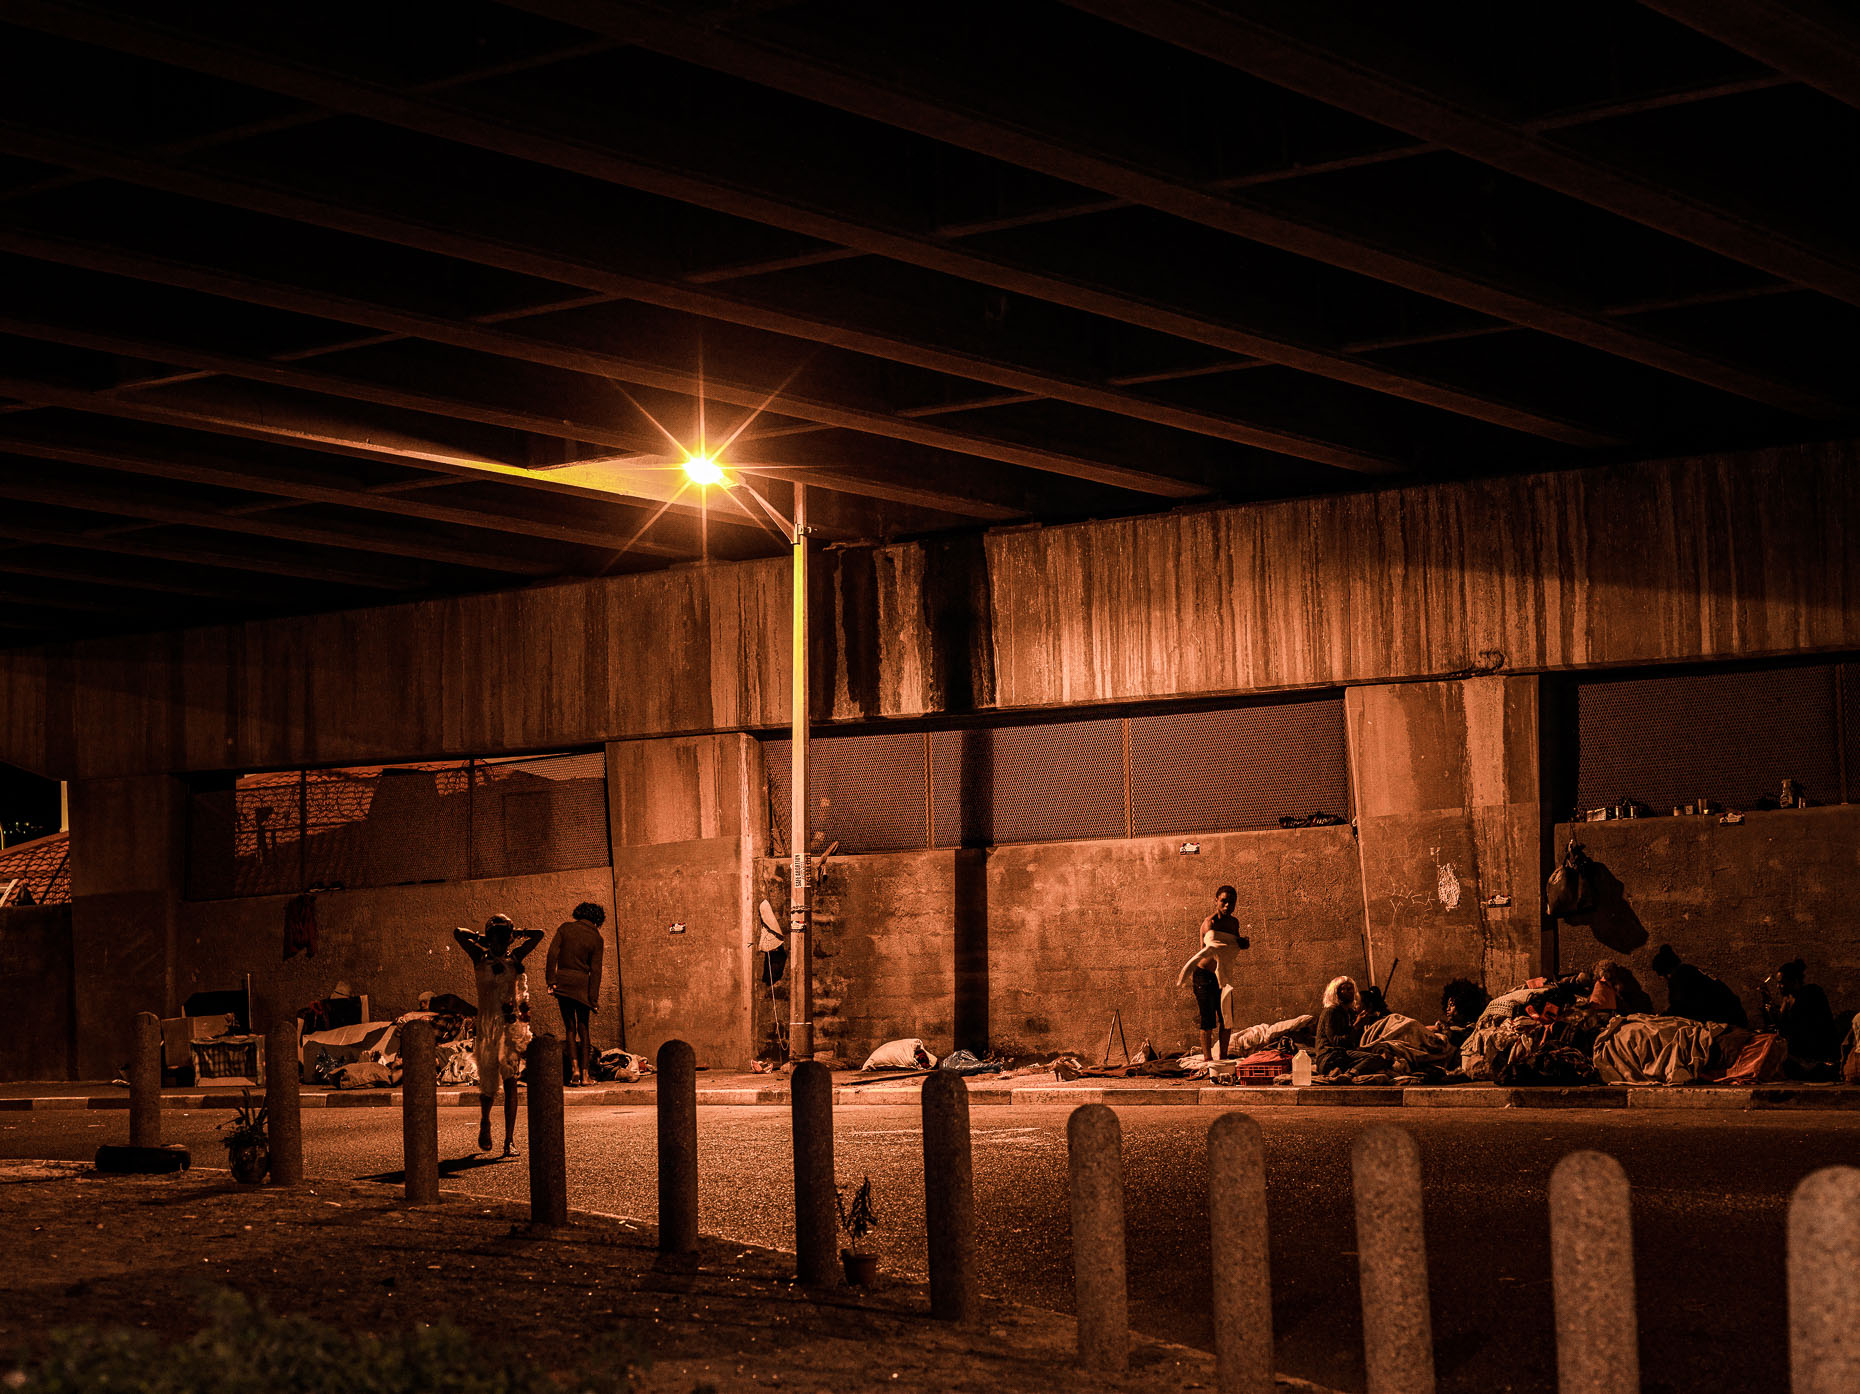 Under the Woodstock Bridge, downtown Cape Town, at night, and home to a transgender community.